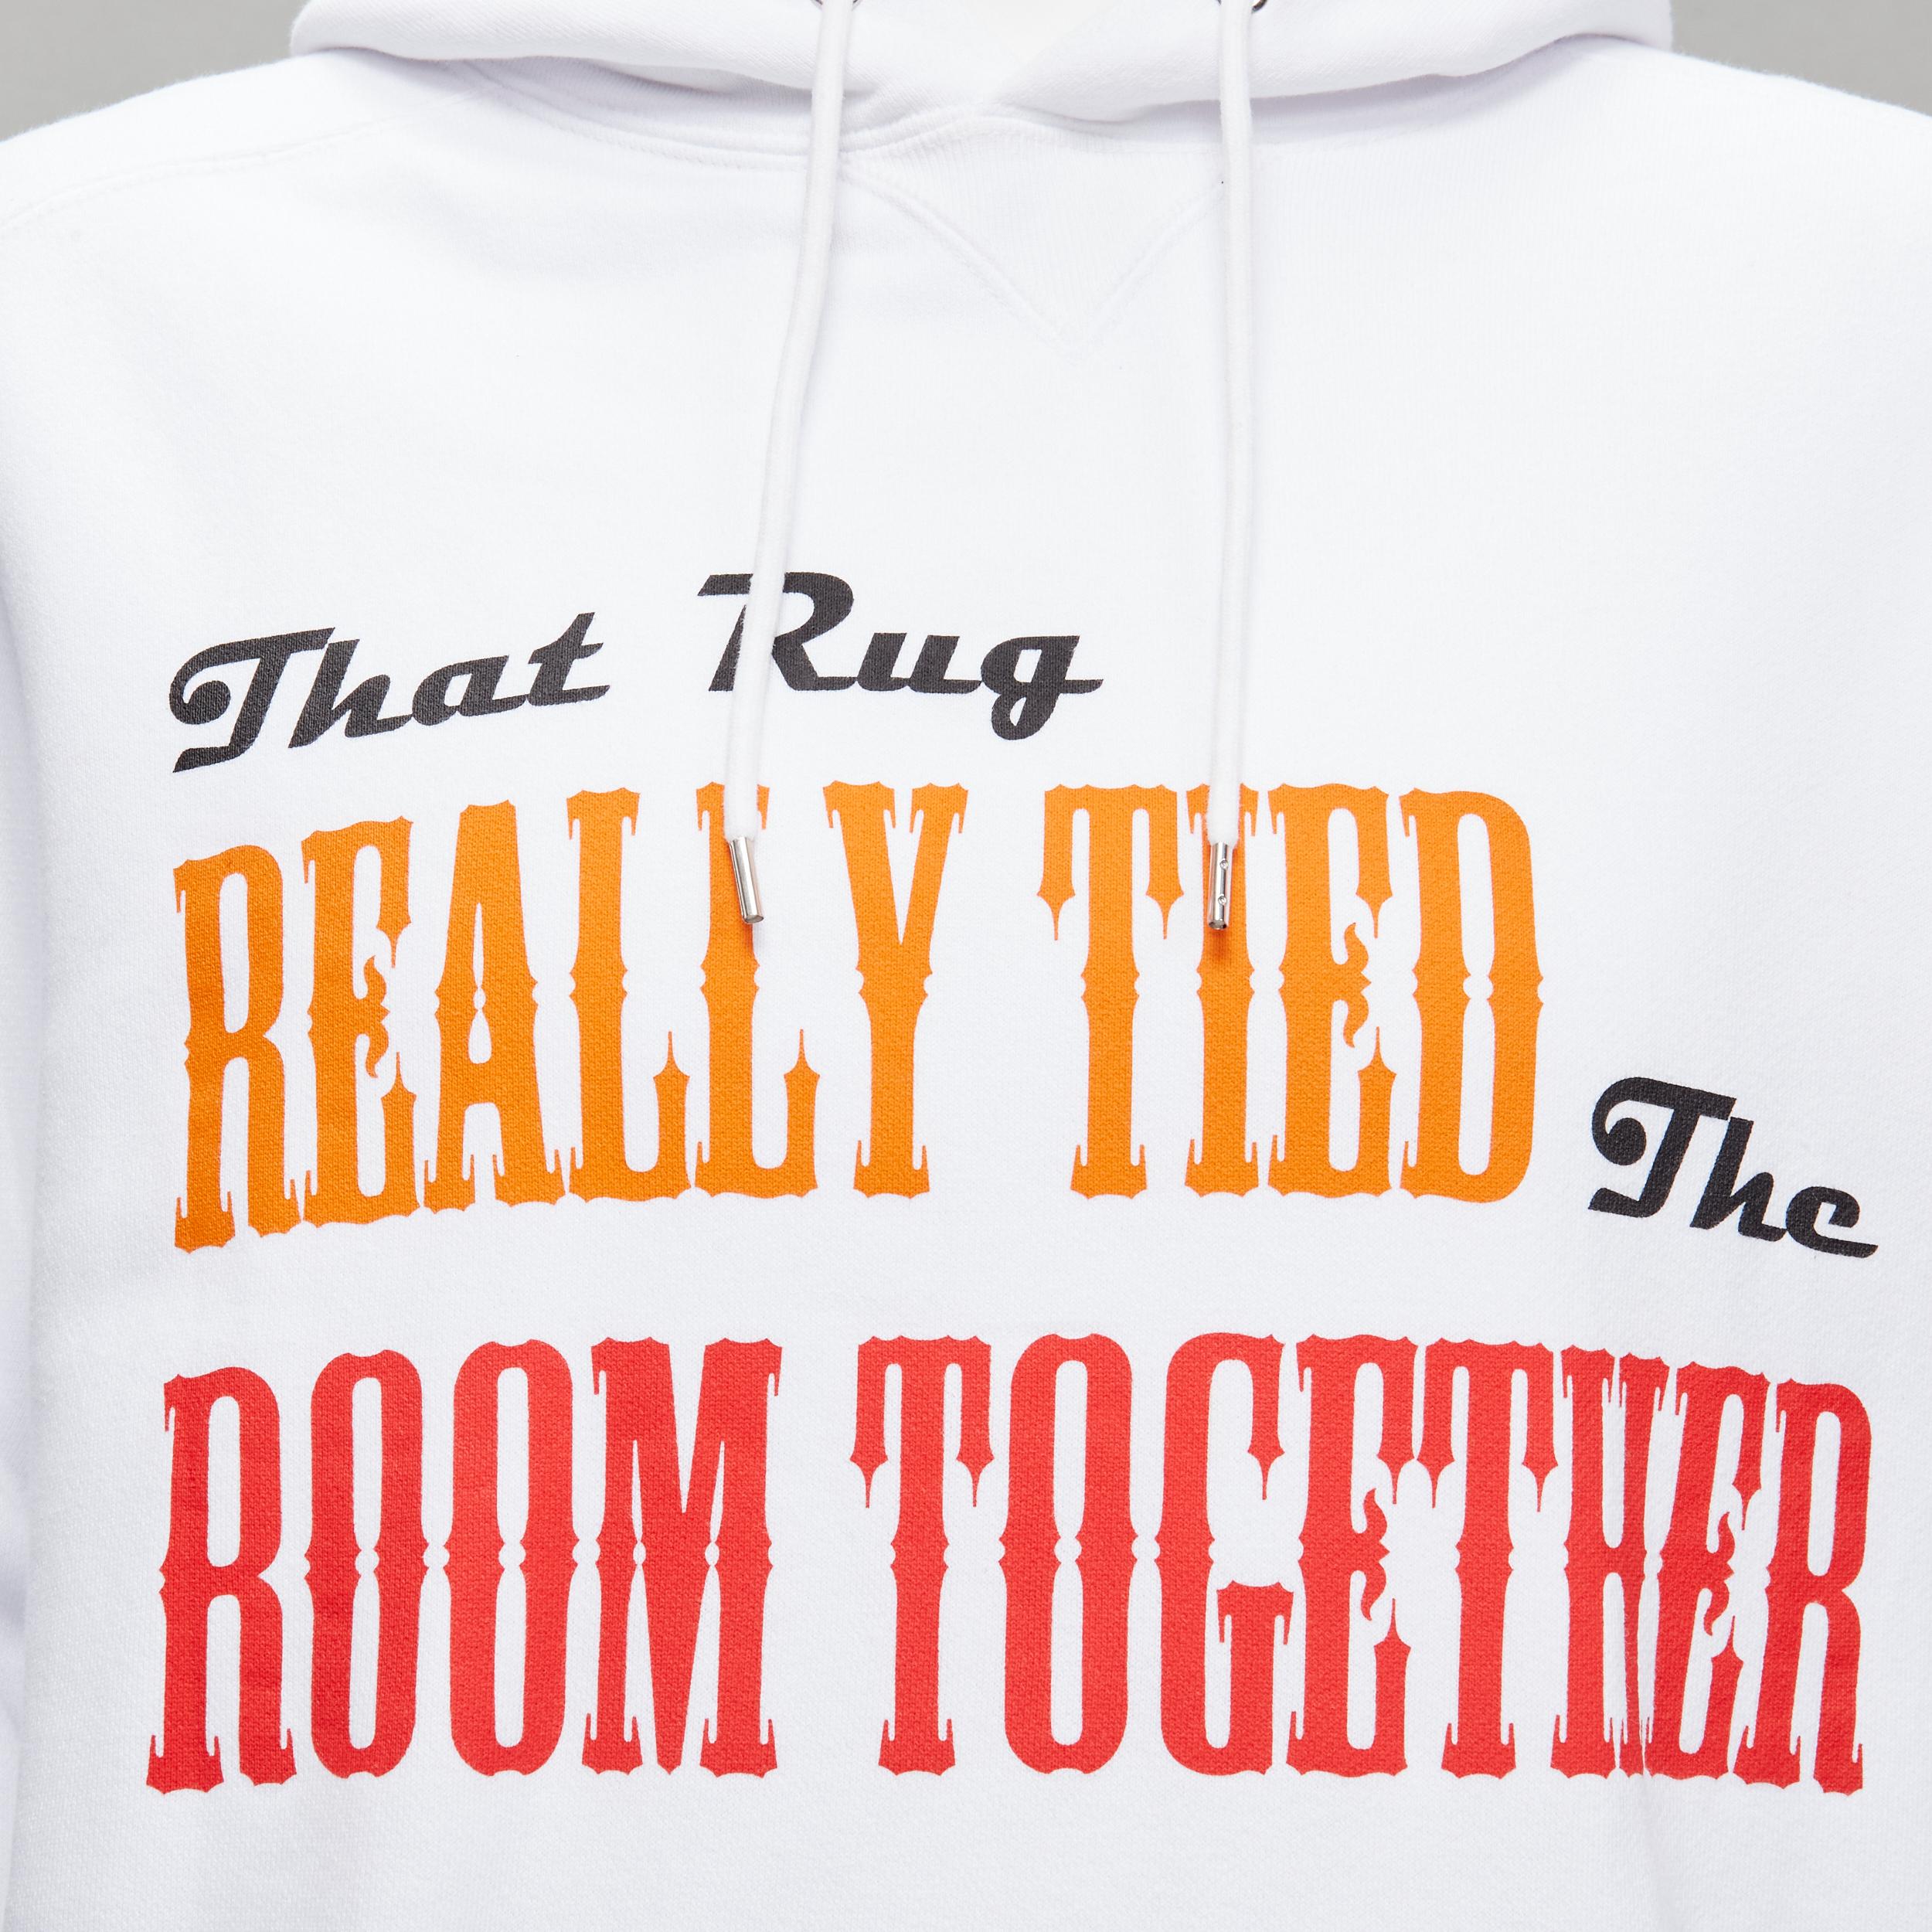 SACAI 2020 Big Lebowski Really Tied Room Together slogan white hoodie Sz.2 M
Reference: YNWG/A00112
Brand: Sacai
Designer: Chitose Abe
Collection: 2020 Big Lebowski
Material: Cotton
Color: White, Red
Pattern: Graphic
Closure: Pullover
Extra Details: